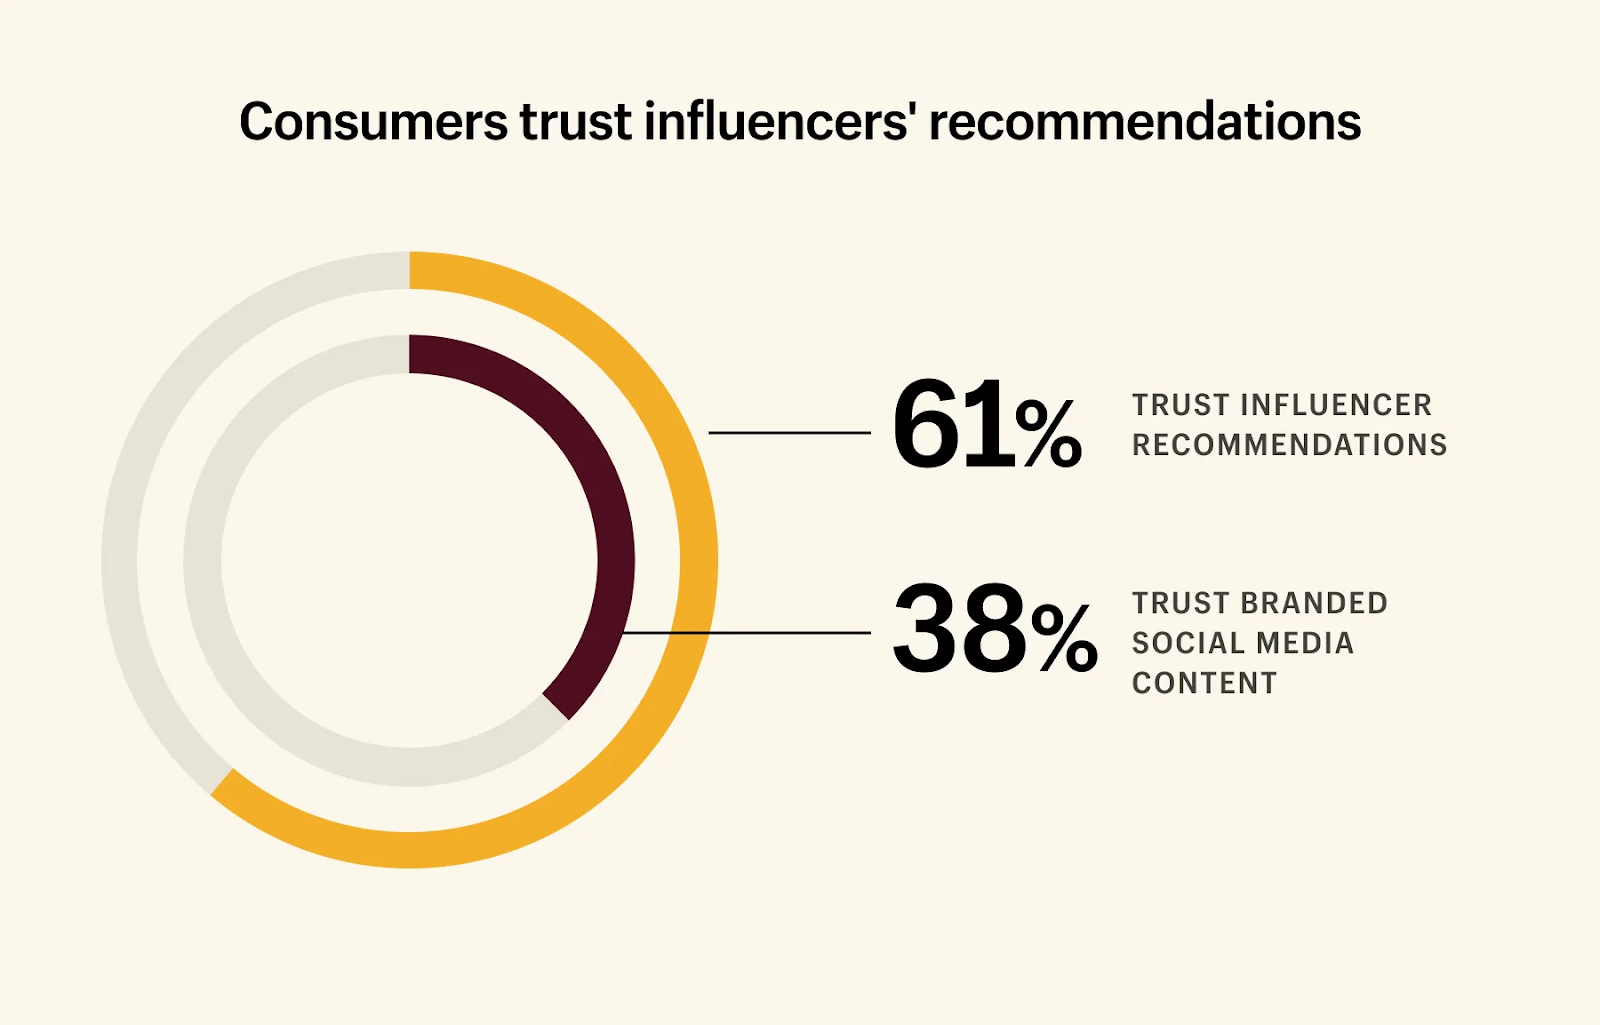 61% of consumers trust influencer recommendations more than brands. Image Source: Shopify